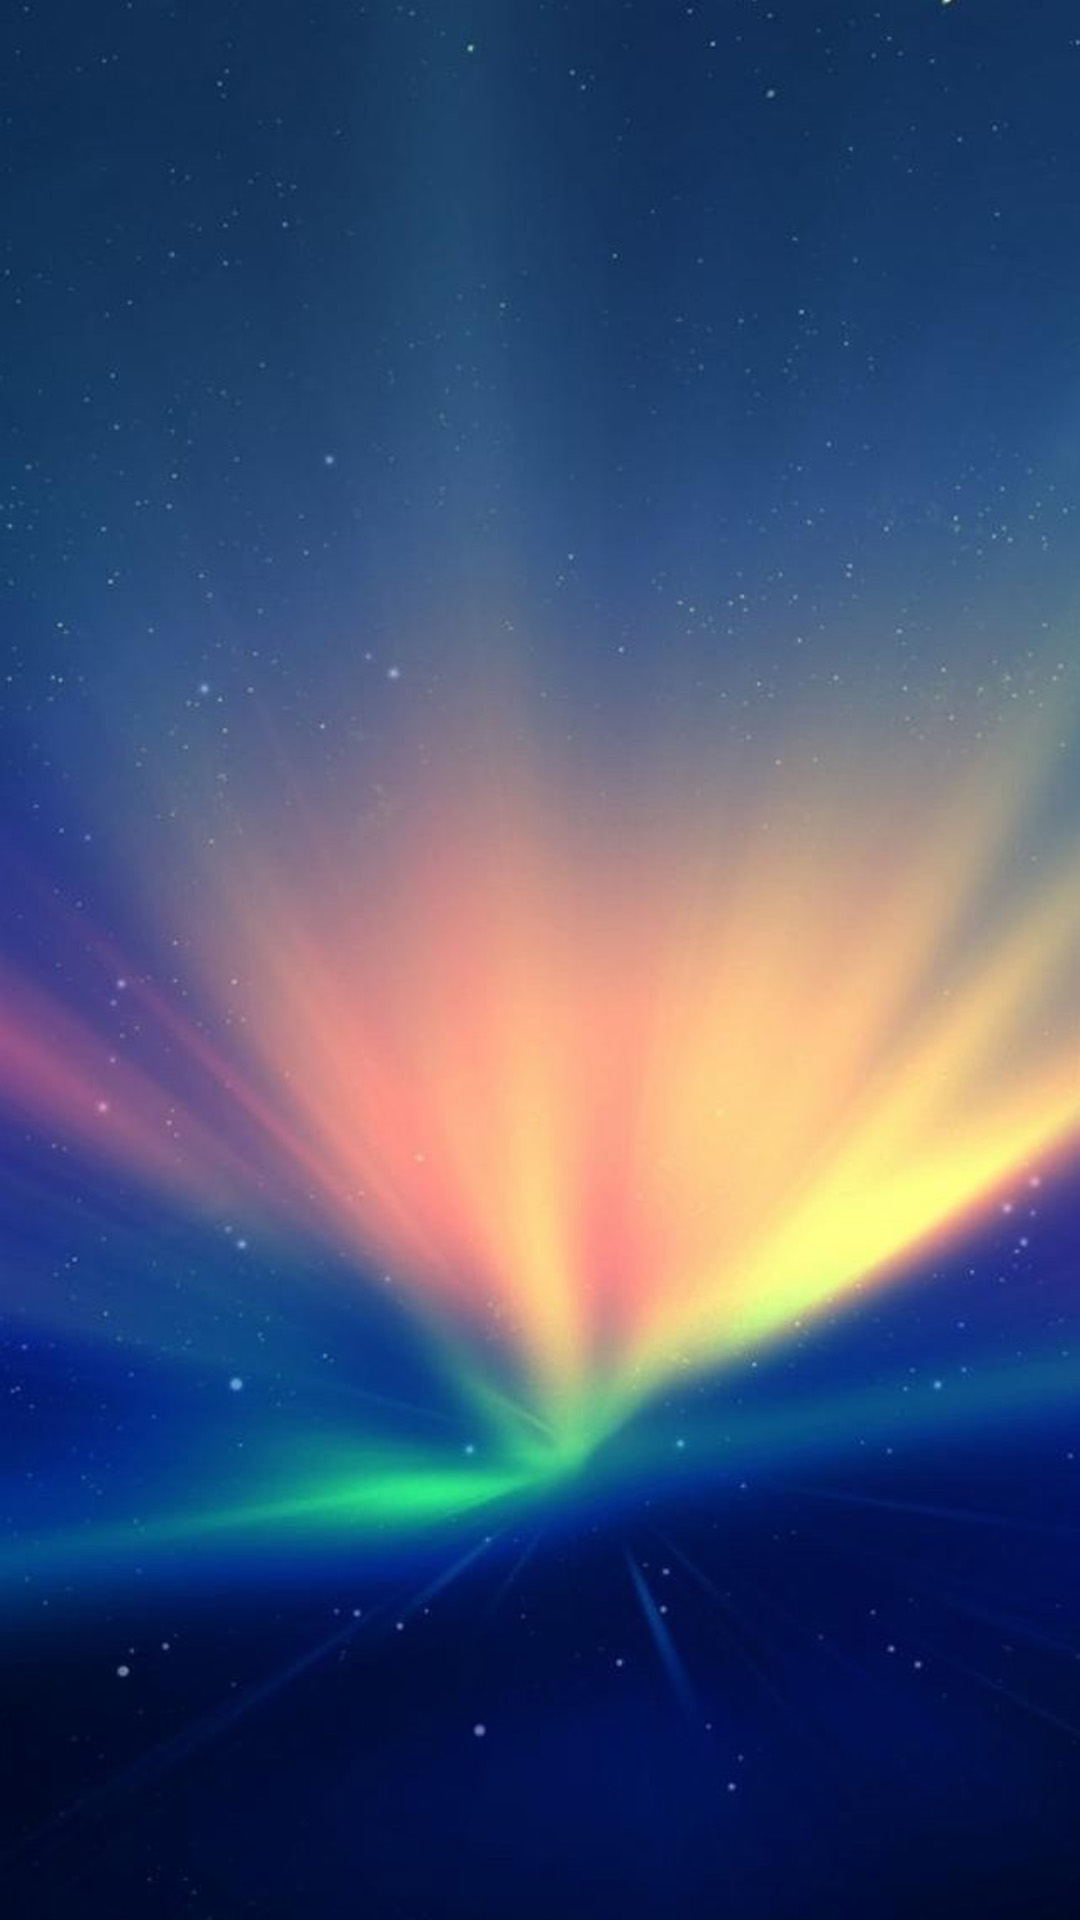 Htc One M8 Wallpapers Download - 1080x1920 Wallpaper 